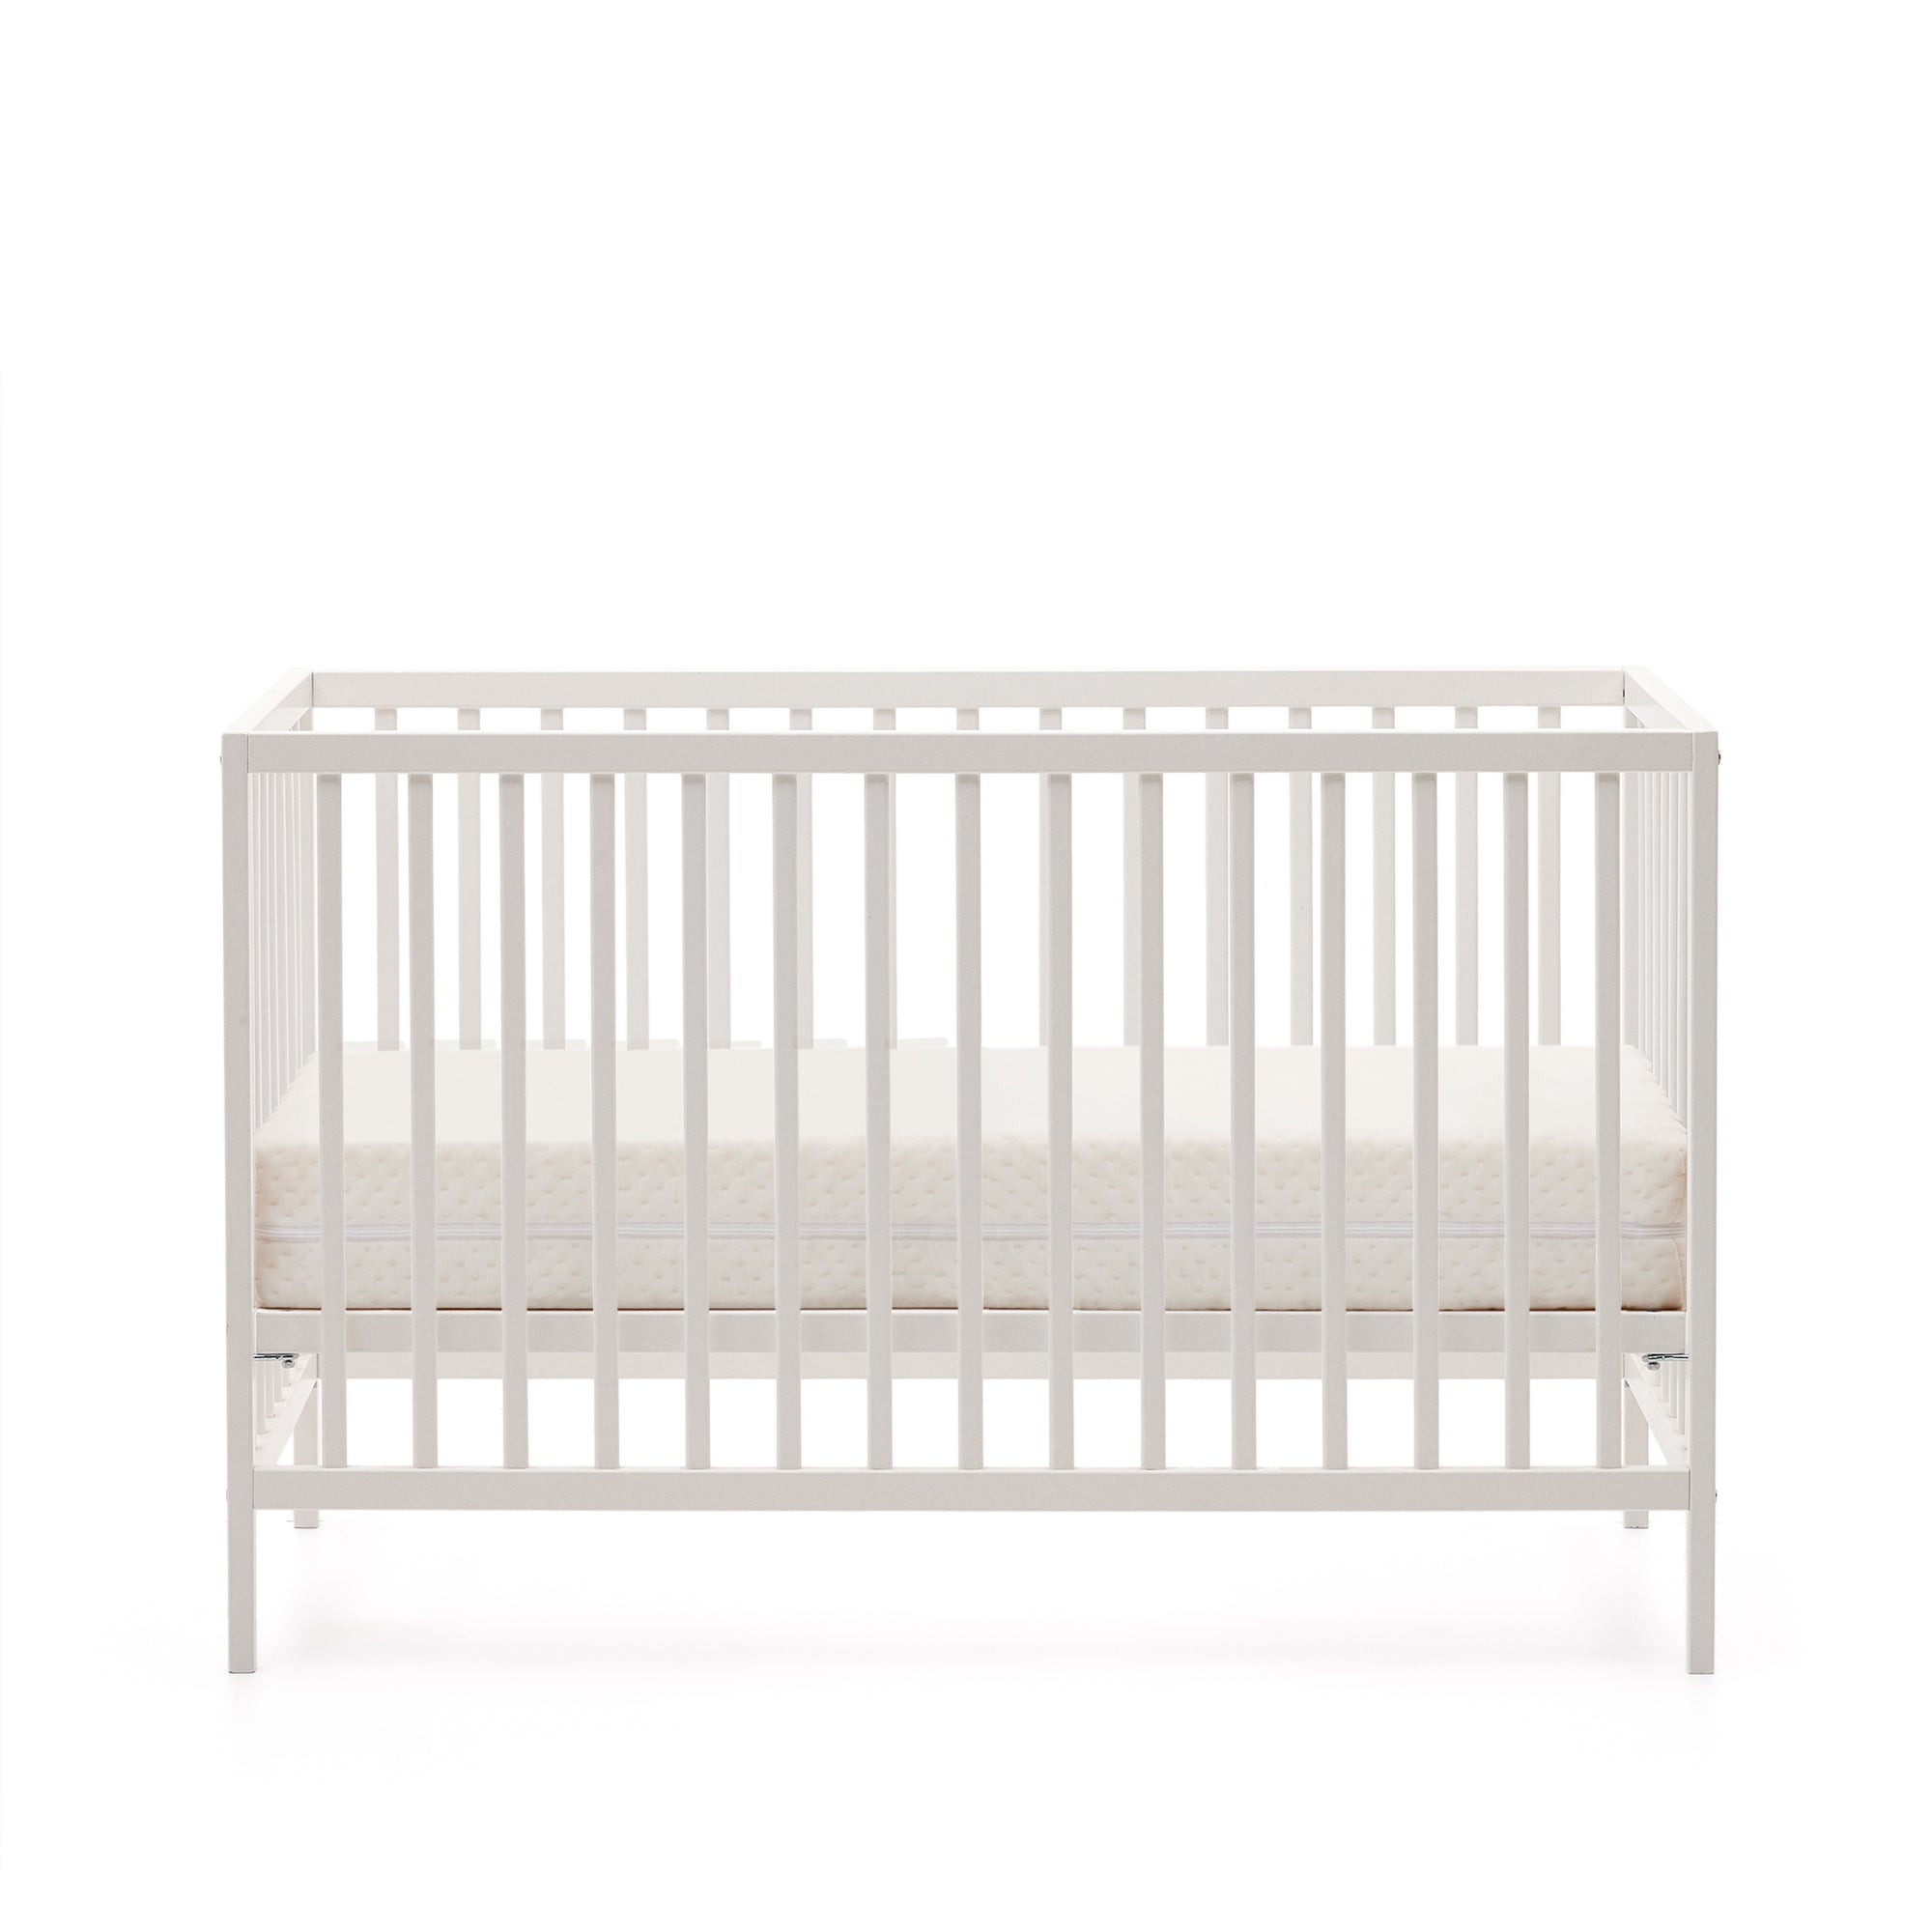 Shantal solid ash wood cot in white finish, 60 x 120 cm